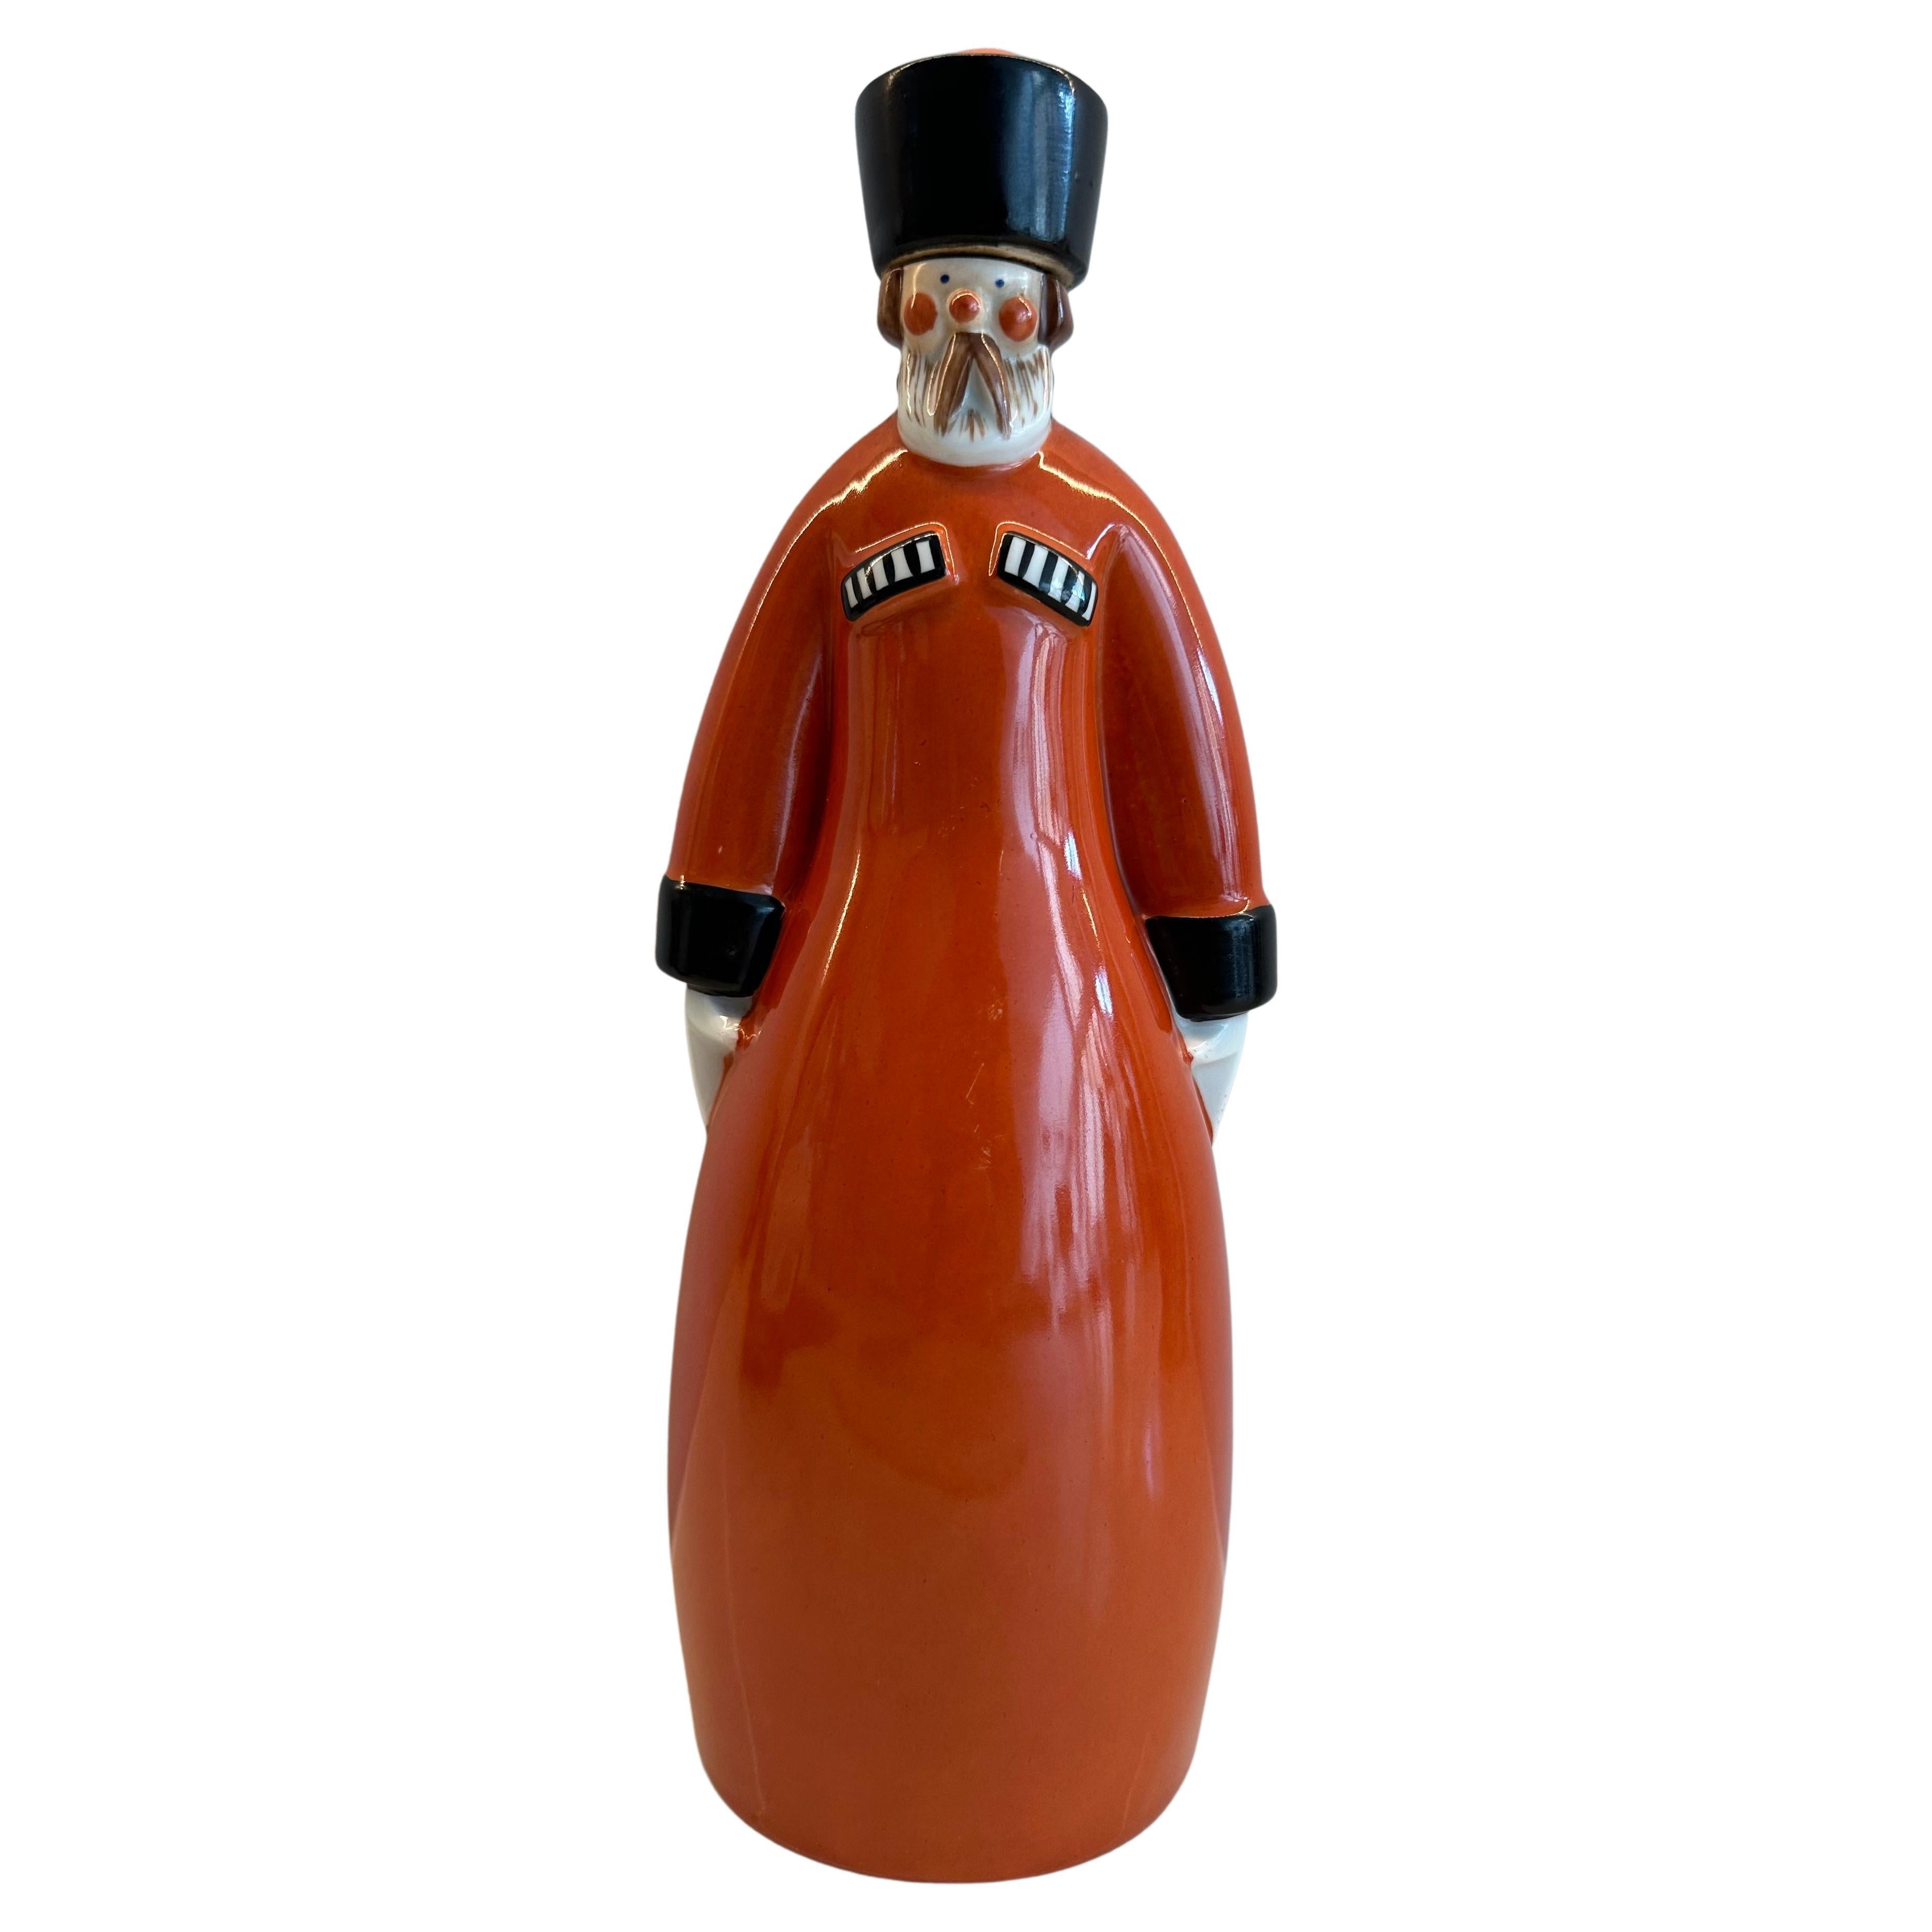 Art Deco 1930s French “Curacao” Figural Russian Soldier Flask by Robj Paris For Sale